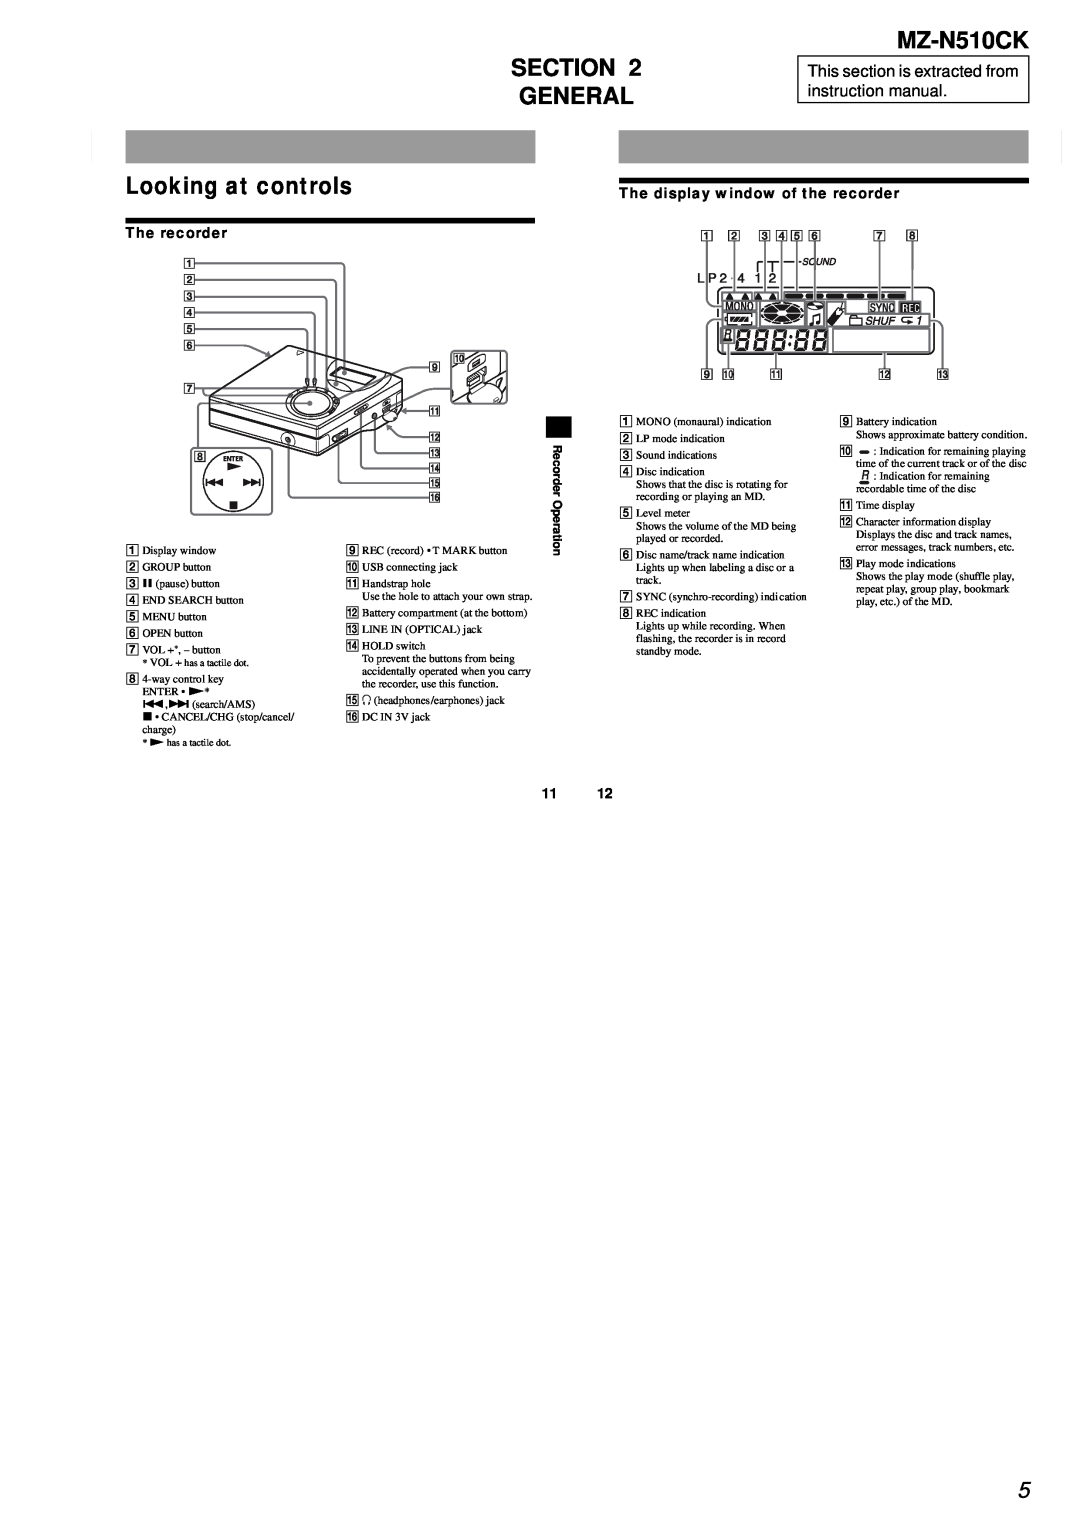 Sony MZ-N510CK service manual Section General, Looking at controls, Recorder Operation 